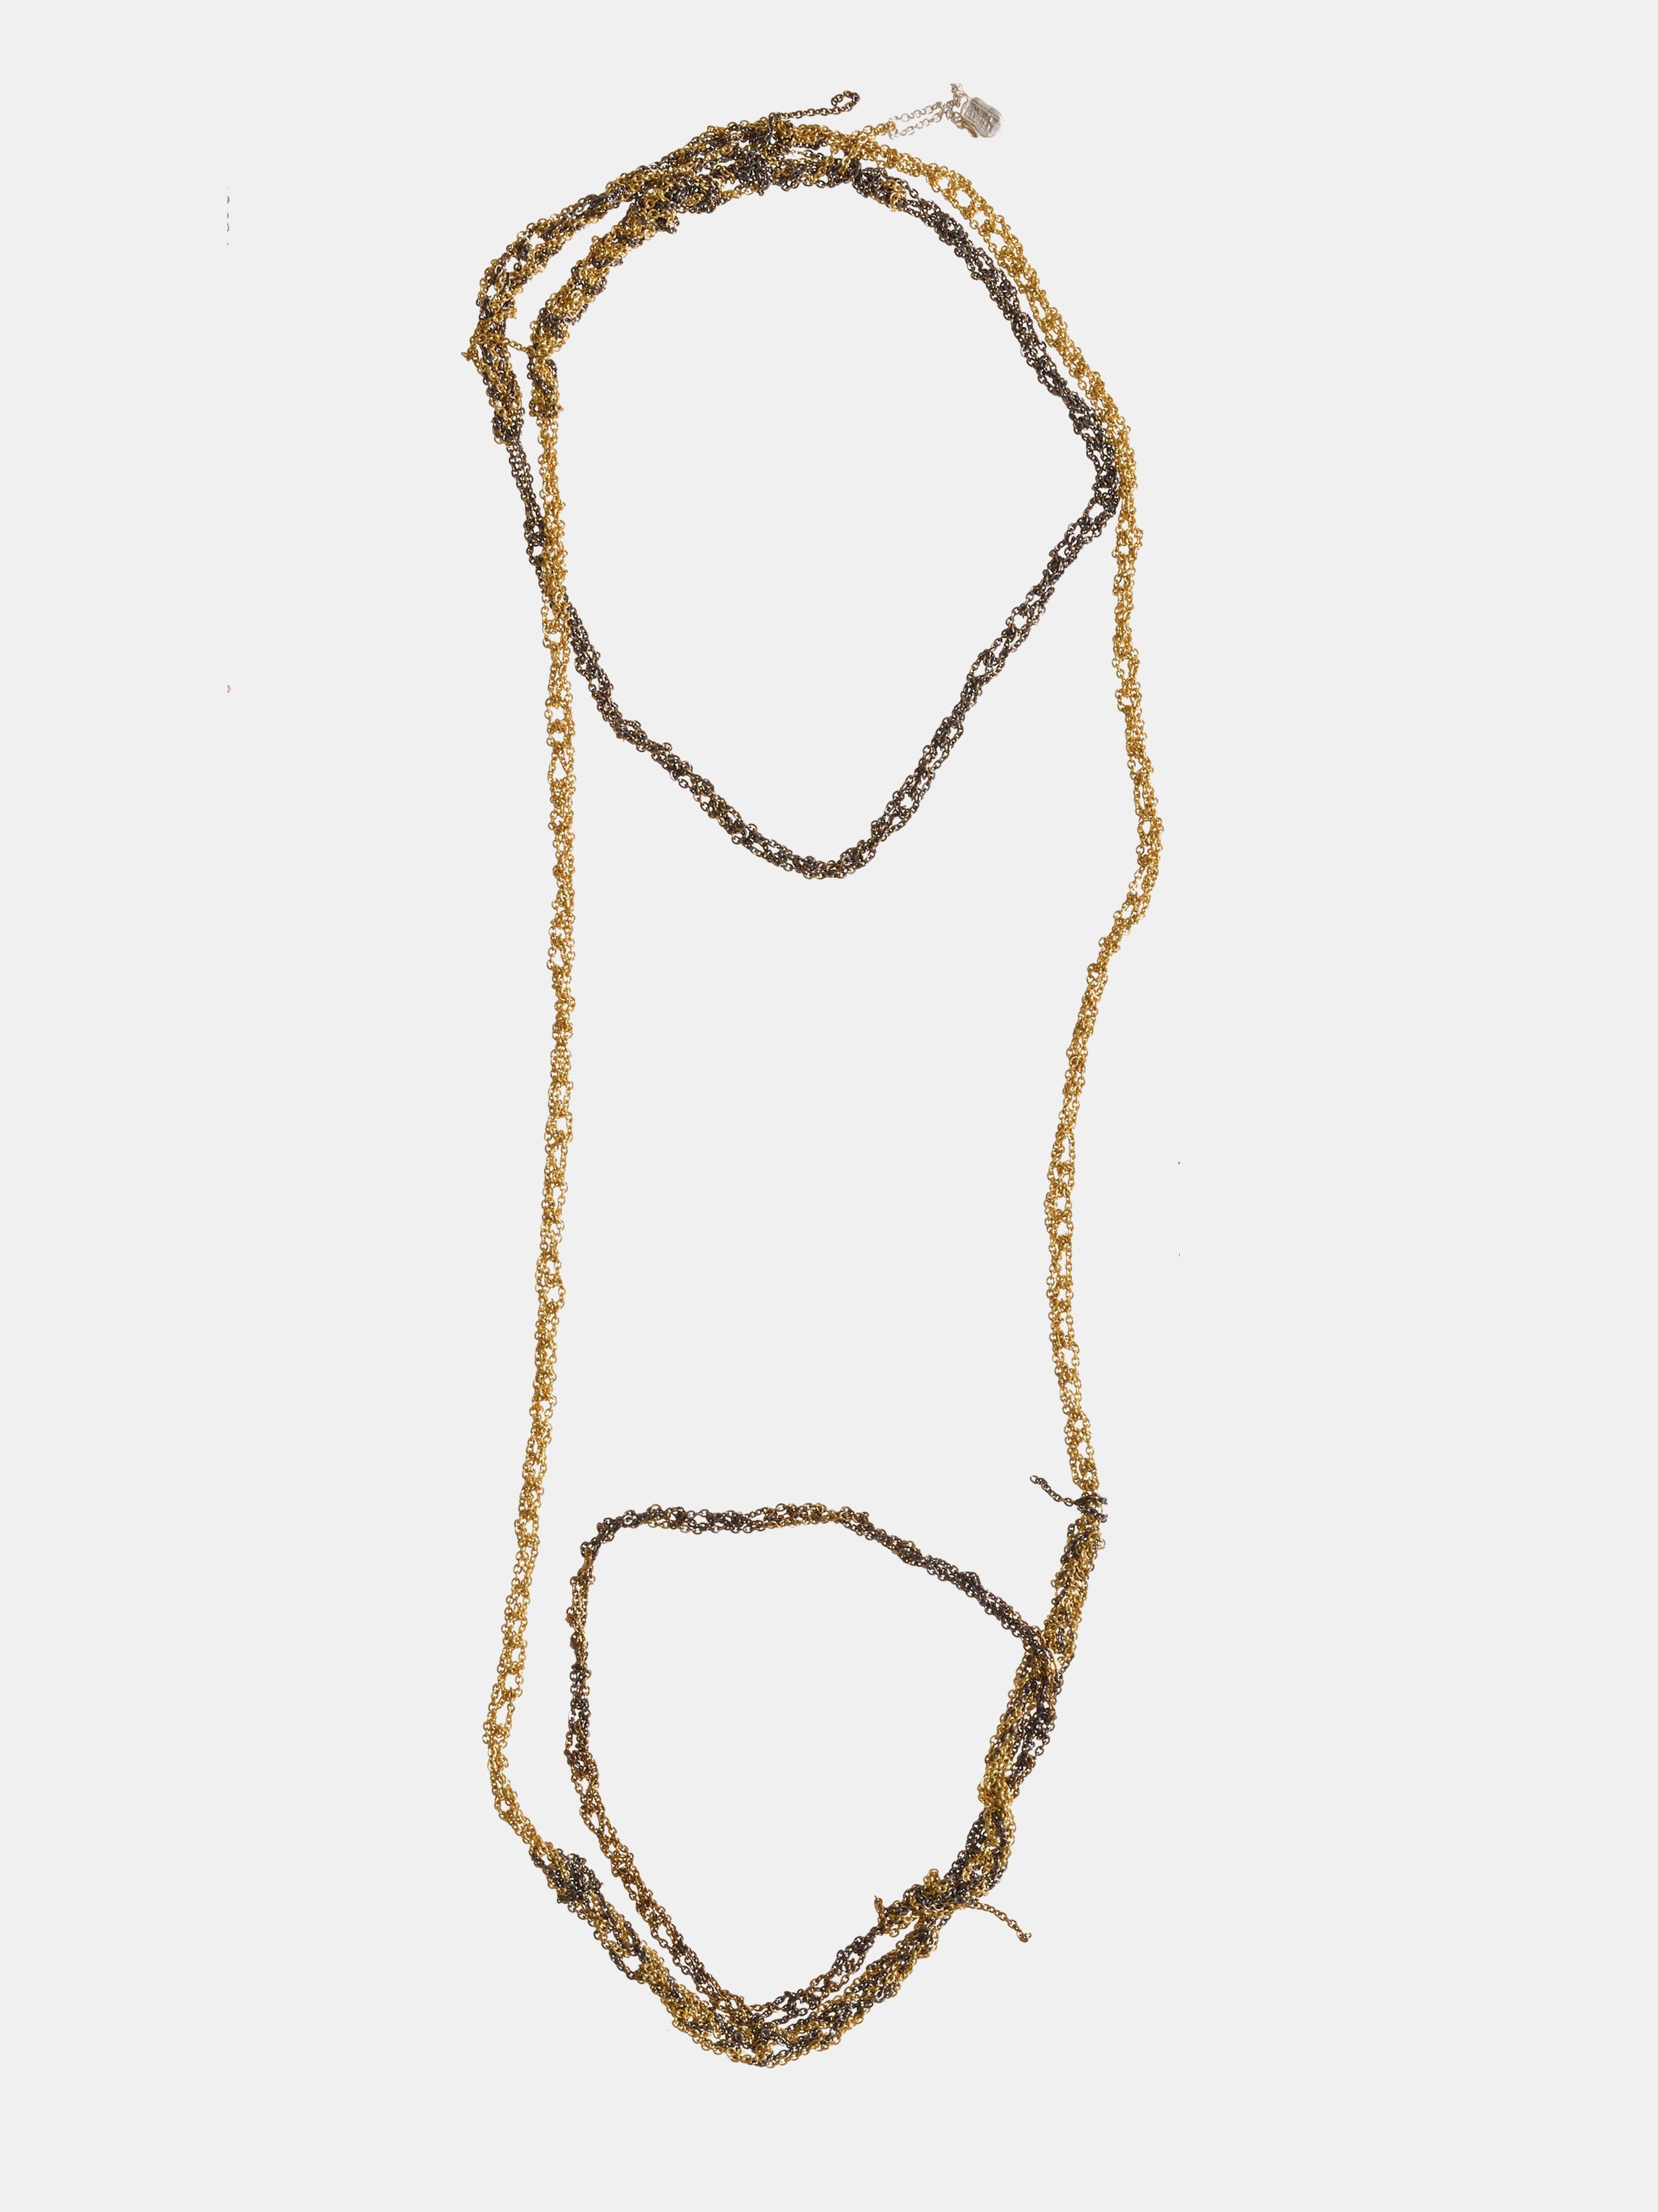 Arielle De Pinto 4-Tone Simple Necklace in Faded Gold and Haze